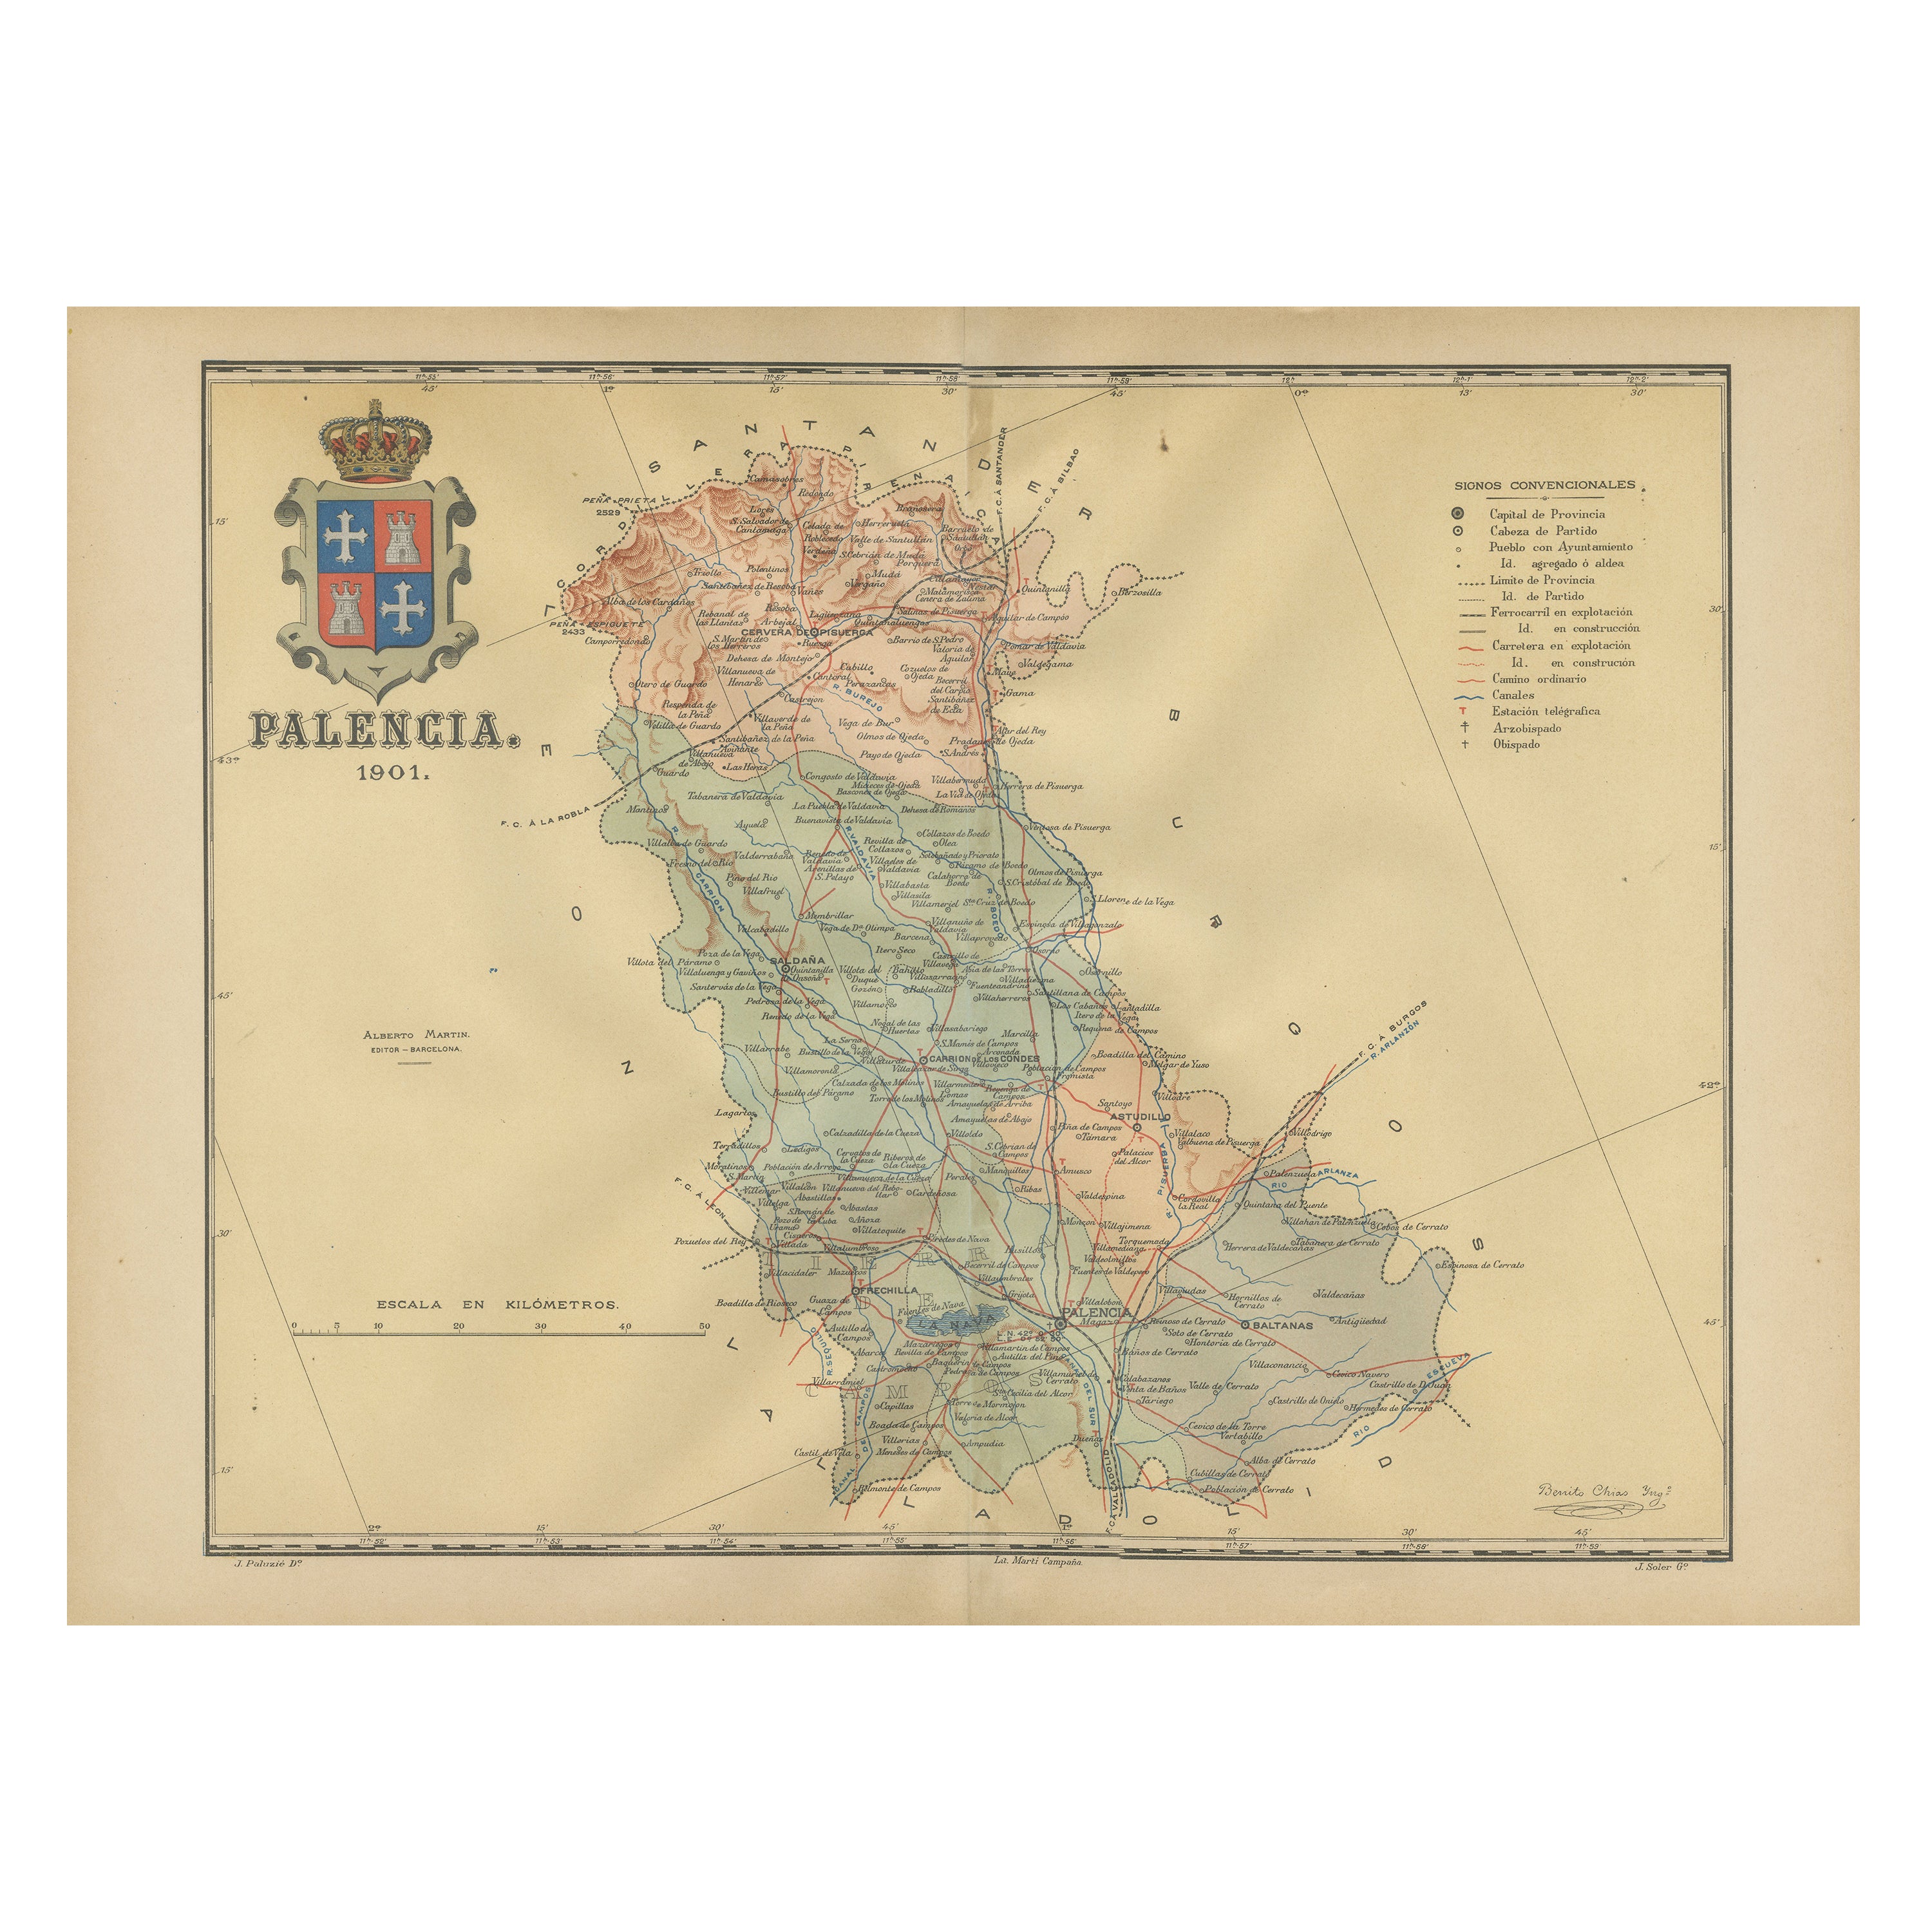 Original Antique Map of Palencia Province, in Northern Spain, 1901